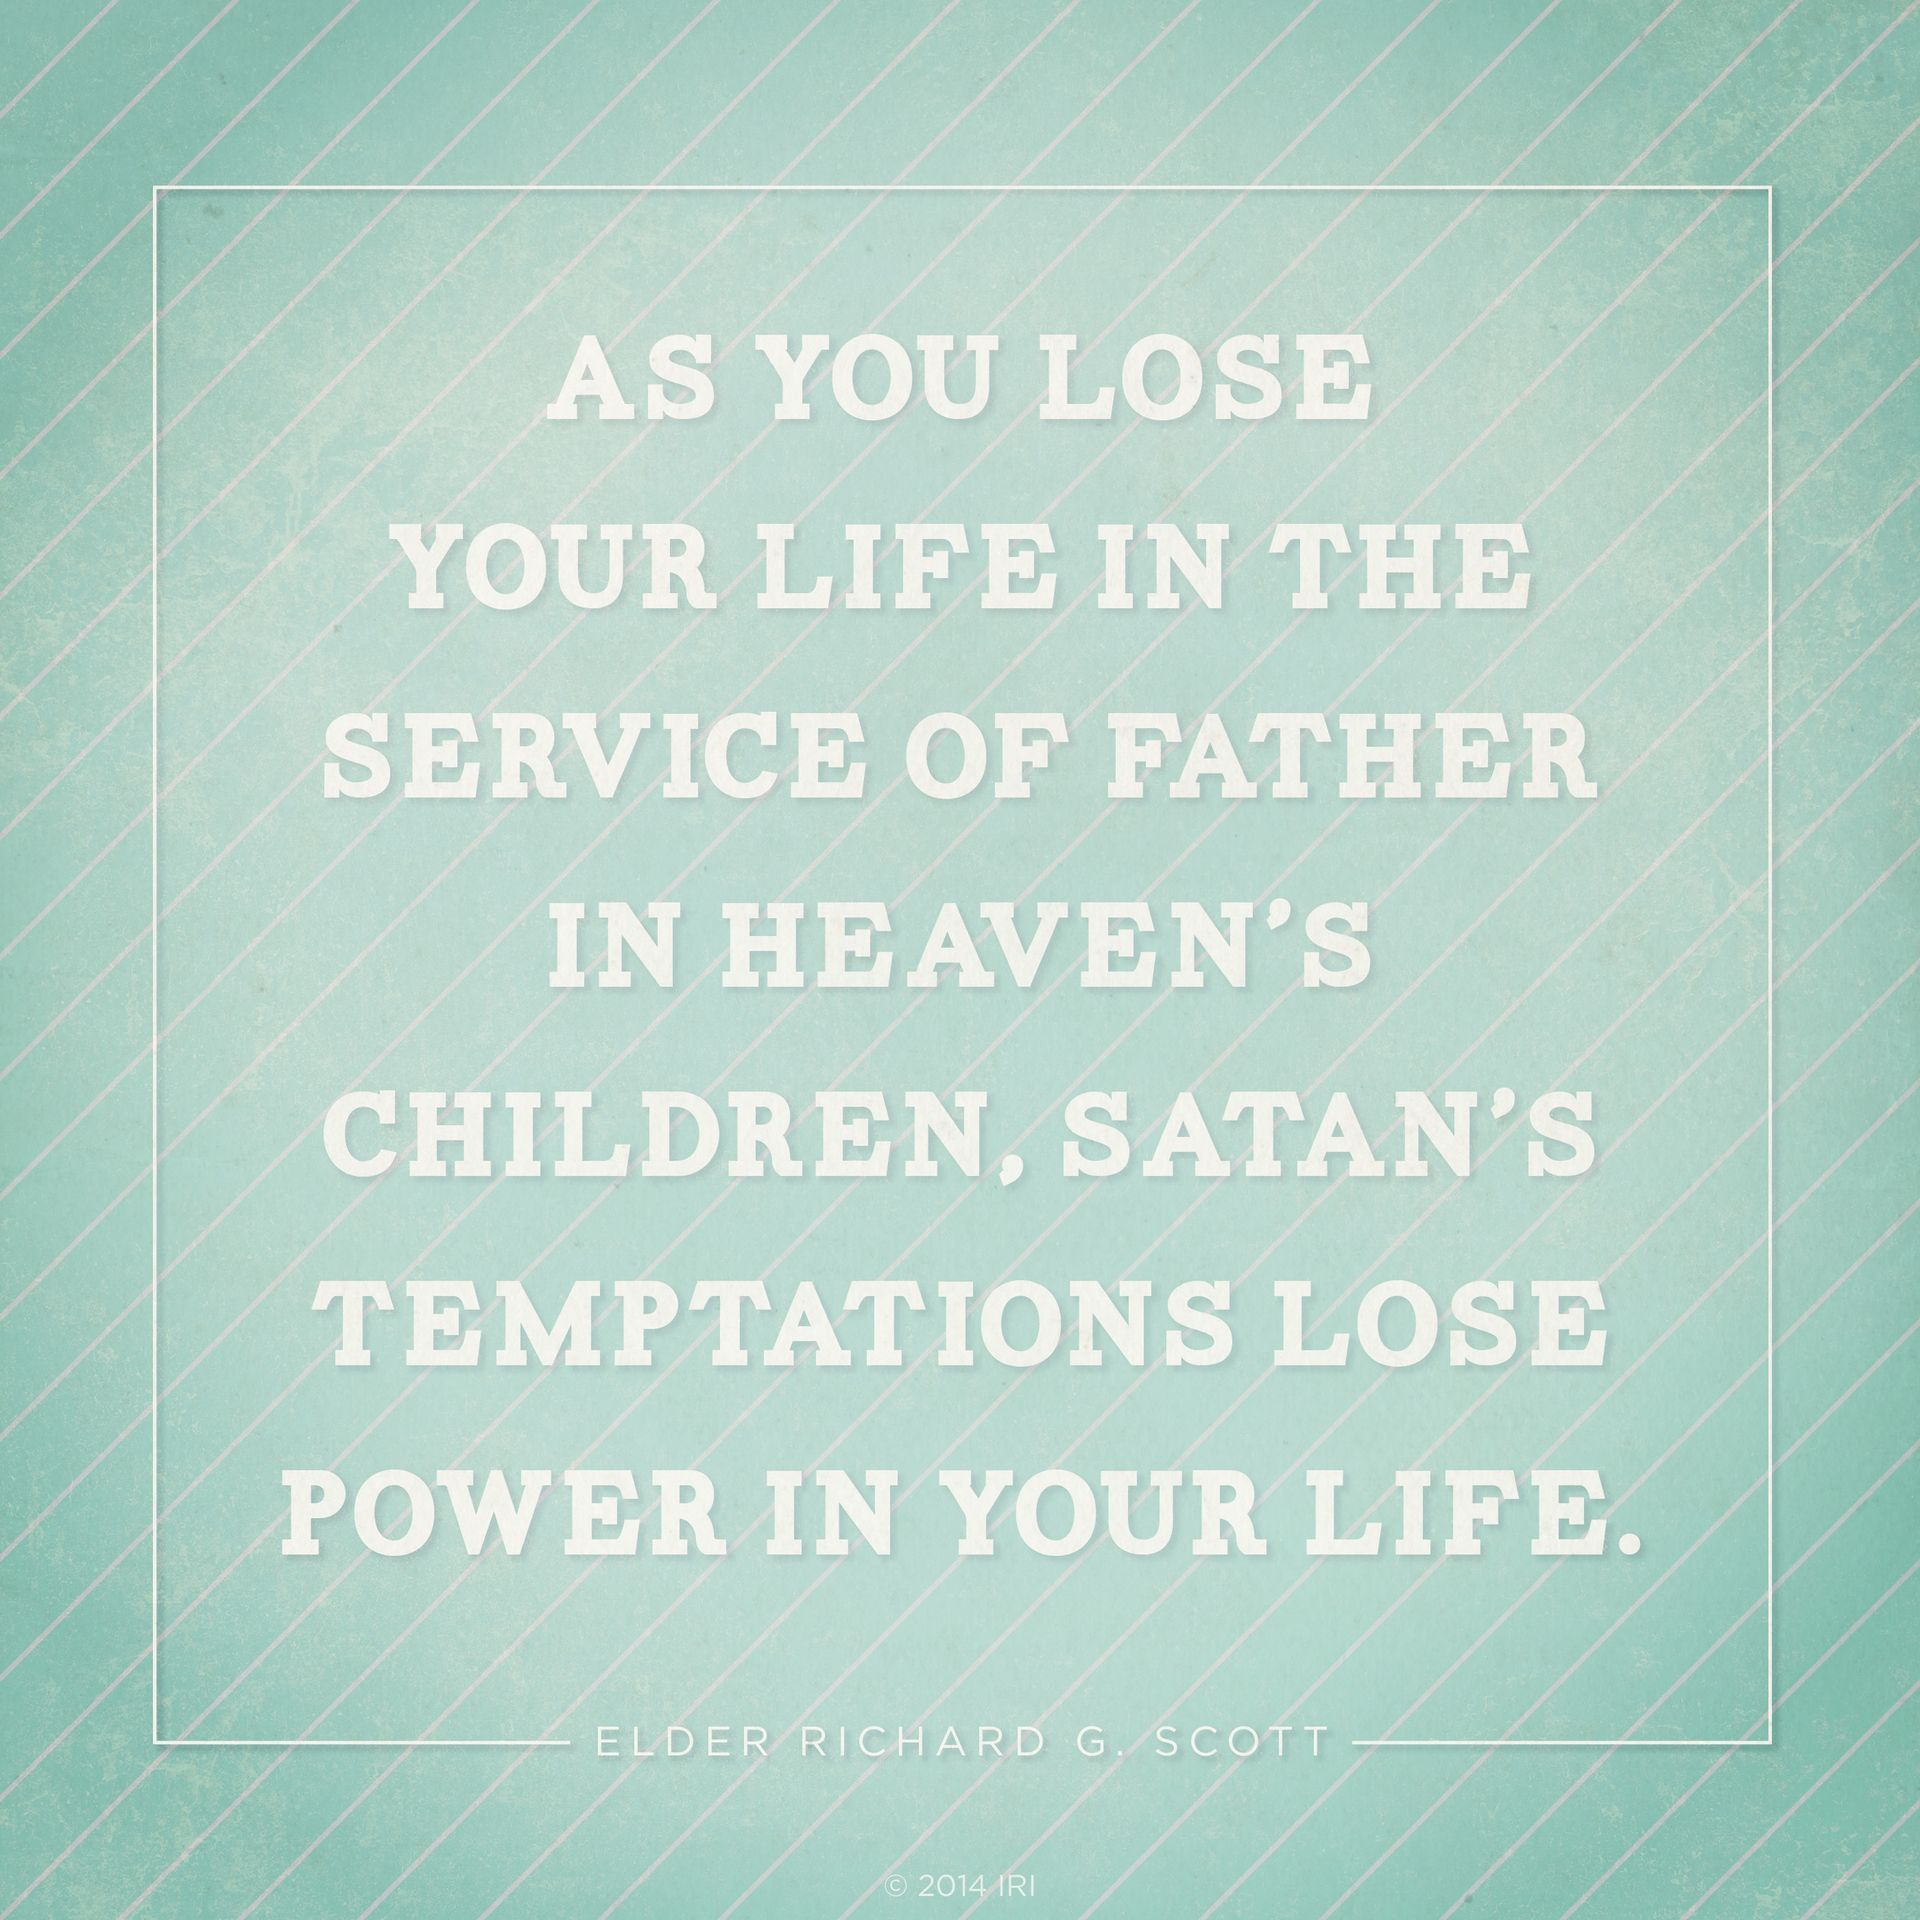 “As you lose your life in the service of Father in Heaven’s children, Satan’s temptations lose power in your life.”—Elder Richard G. Scott, “Personal Strength through the Atonement of Jesus Christ”